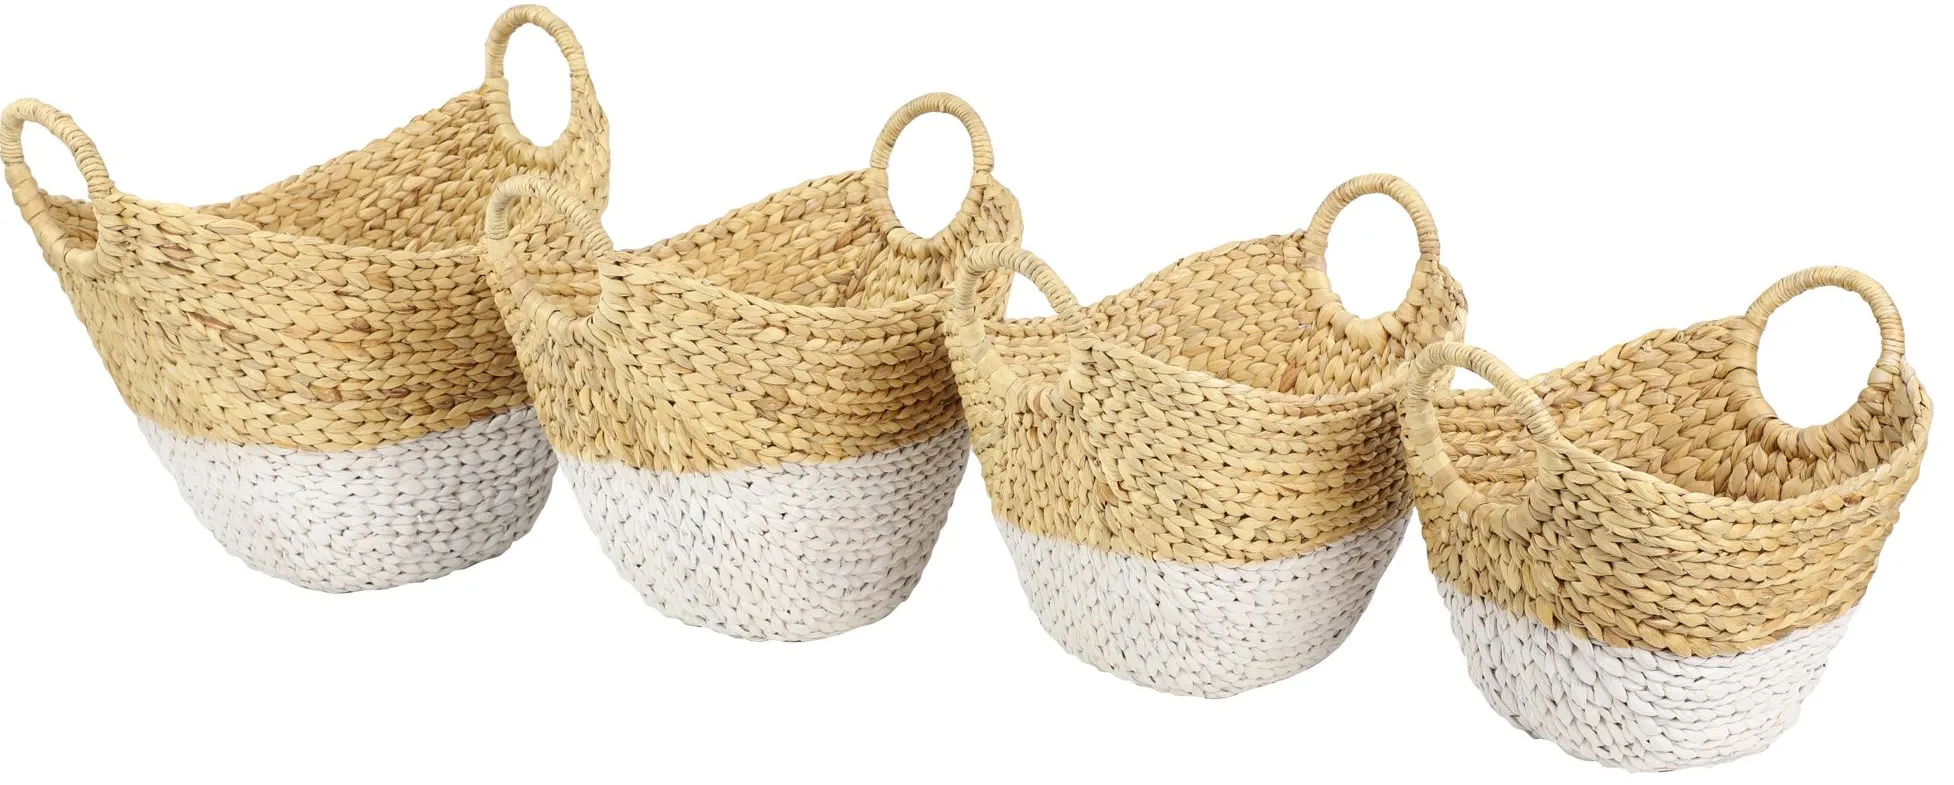 Ivy Collection Storage Baskets - Set of 4 in Brown by UMA Enterprises